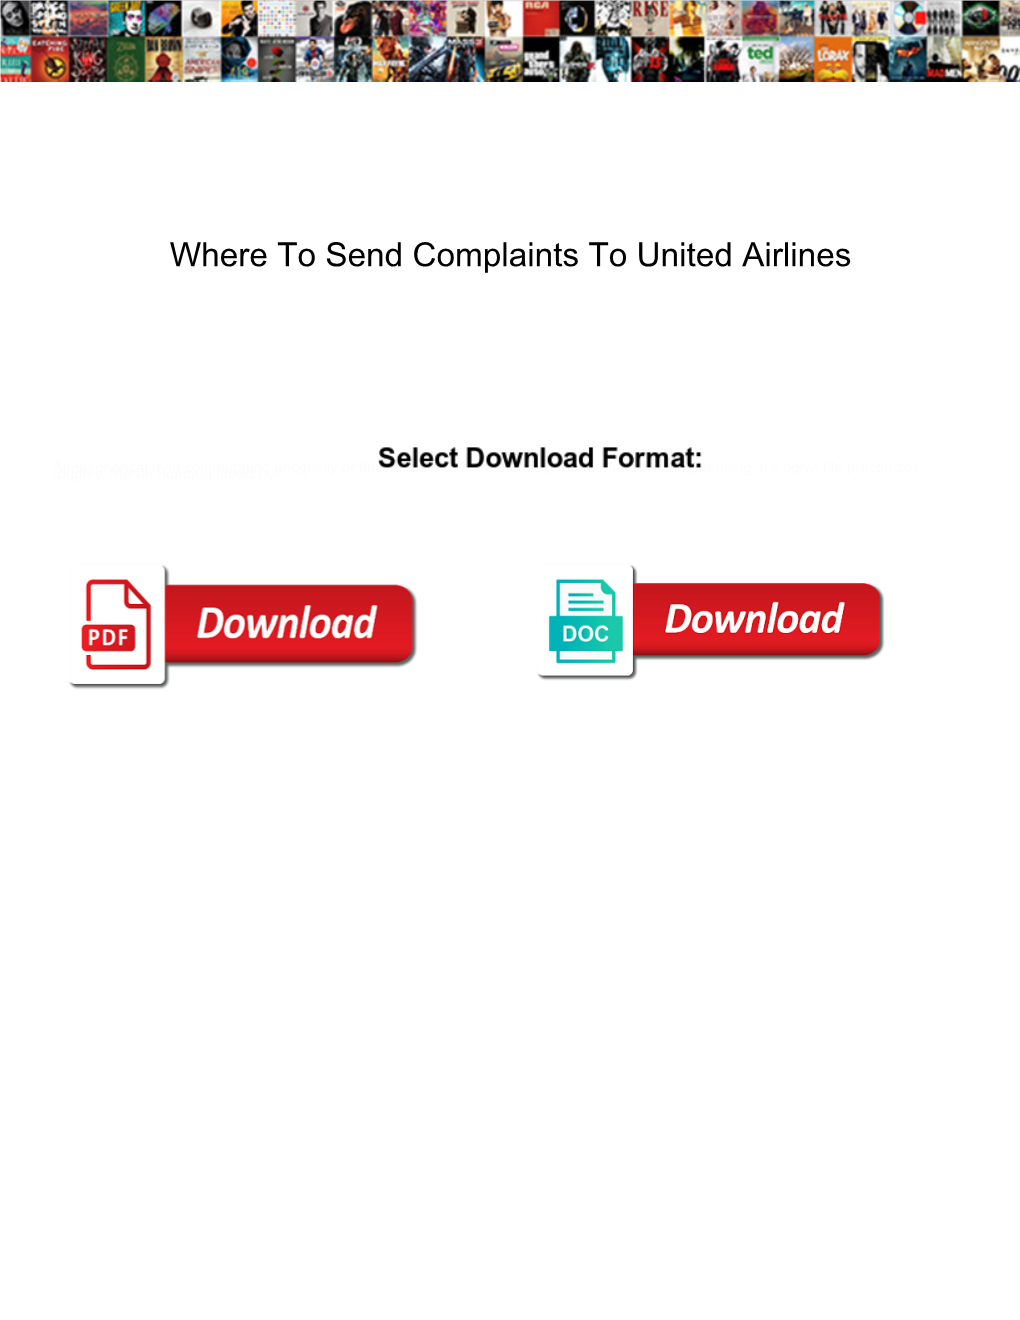 Where to Send Complaints to United Airlines